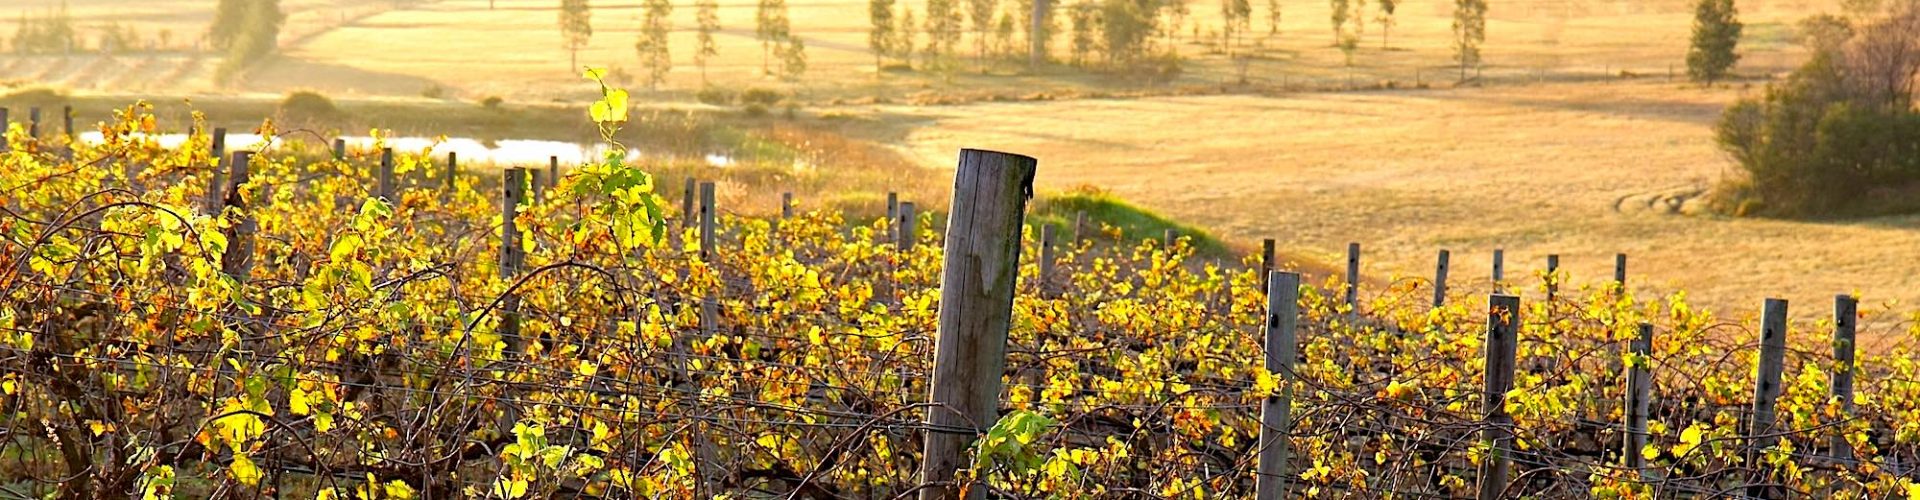 Top 10 Things to Do in the Hunter Valley Region, NSW inner banner